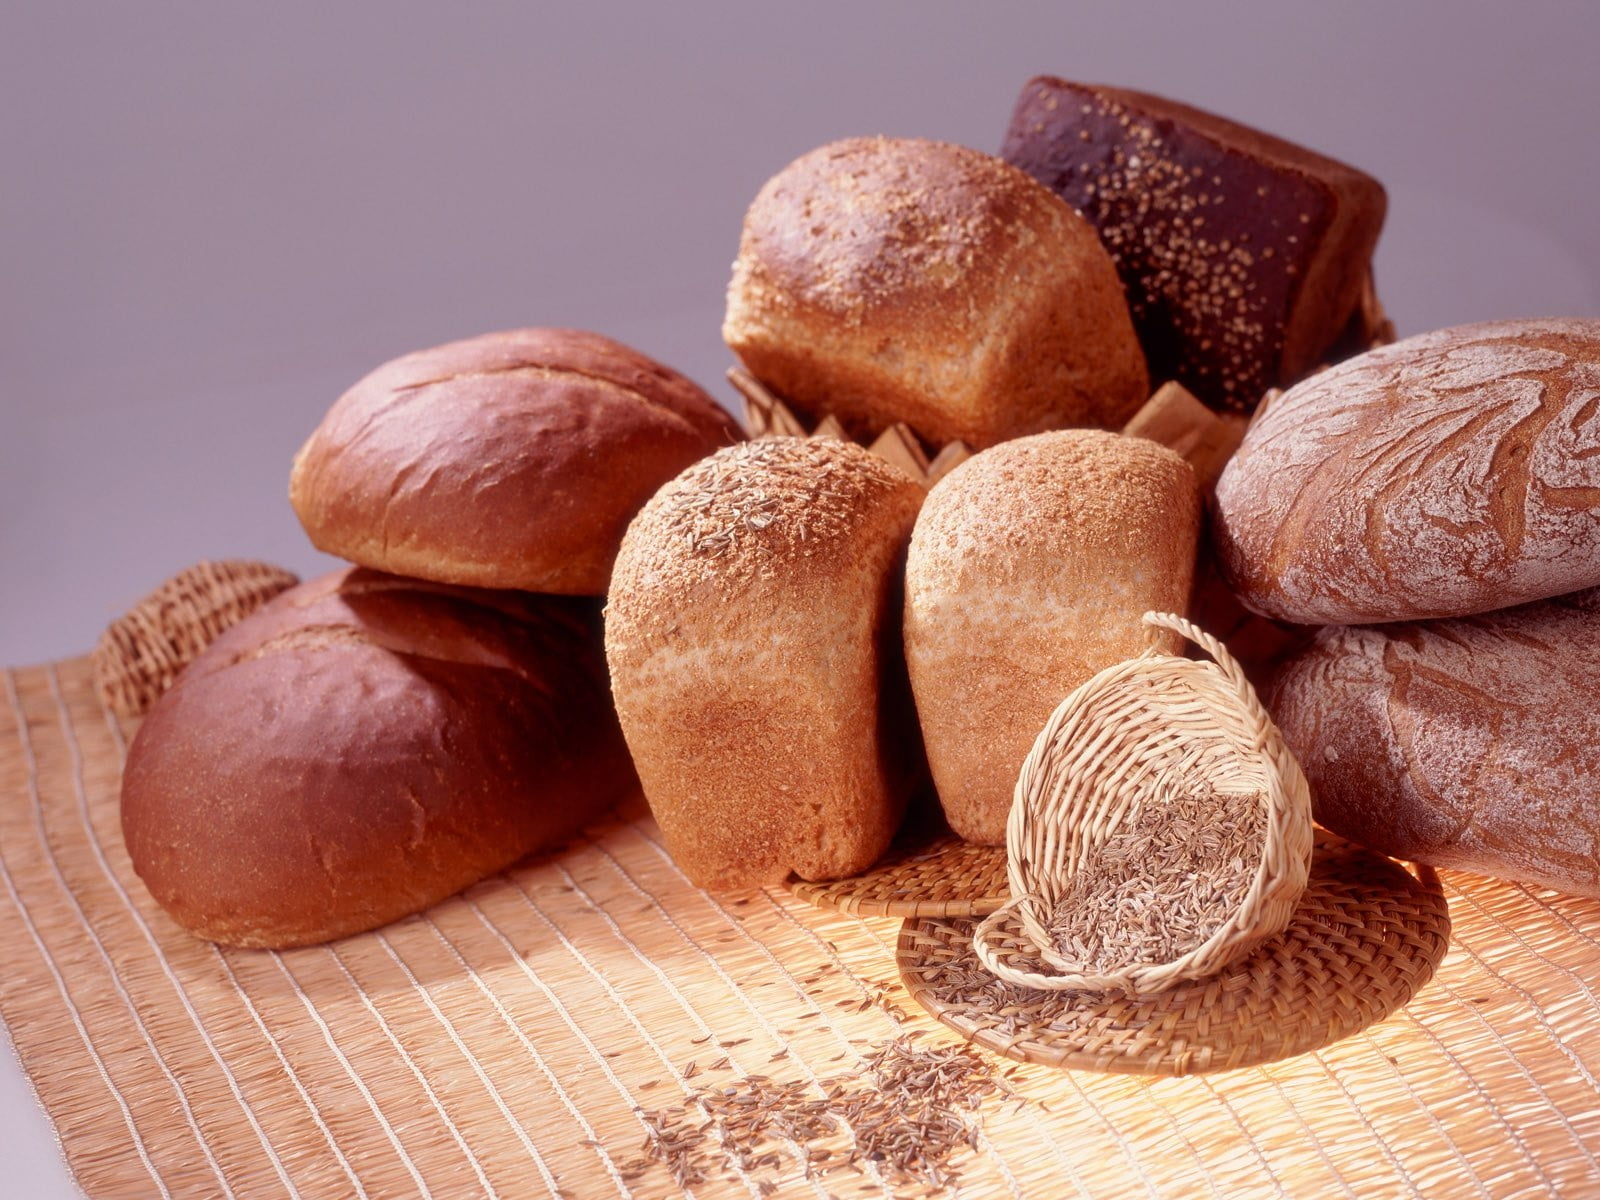 bunch of breads beside white basket on mat